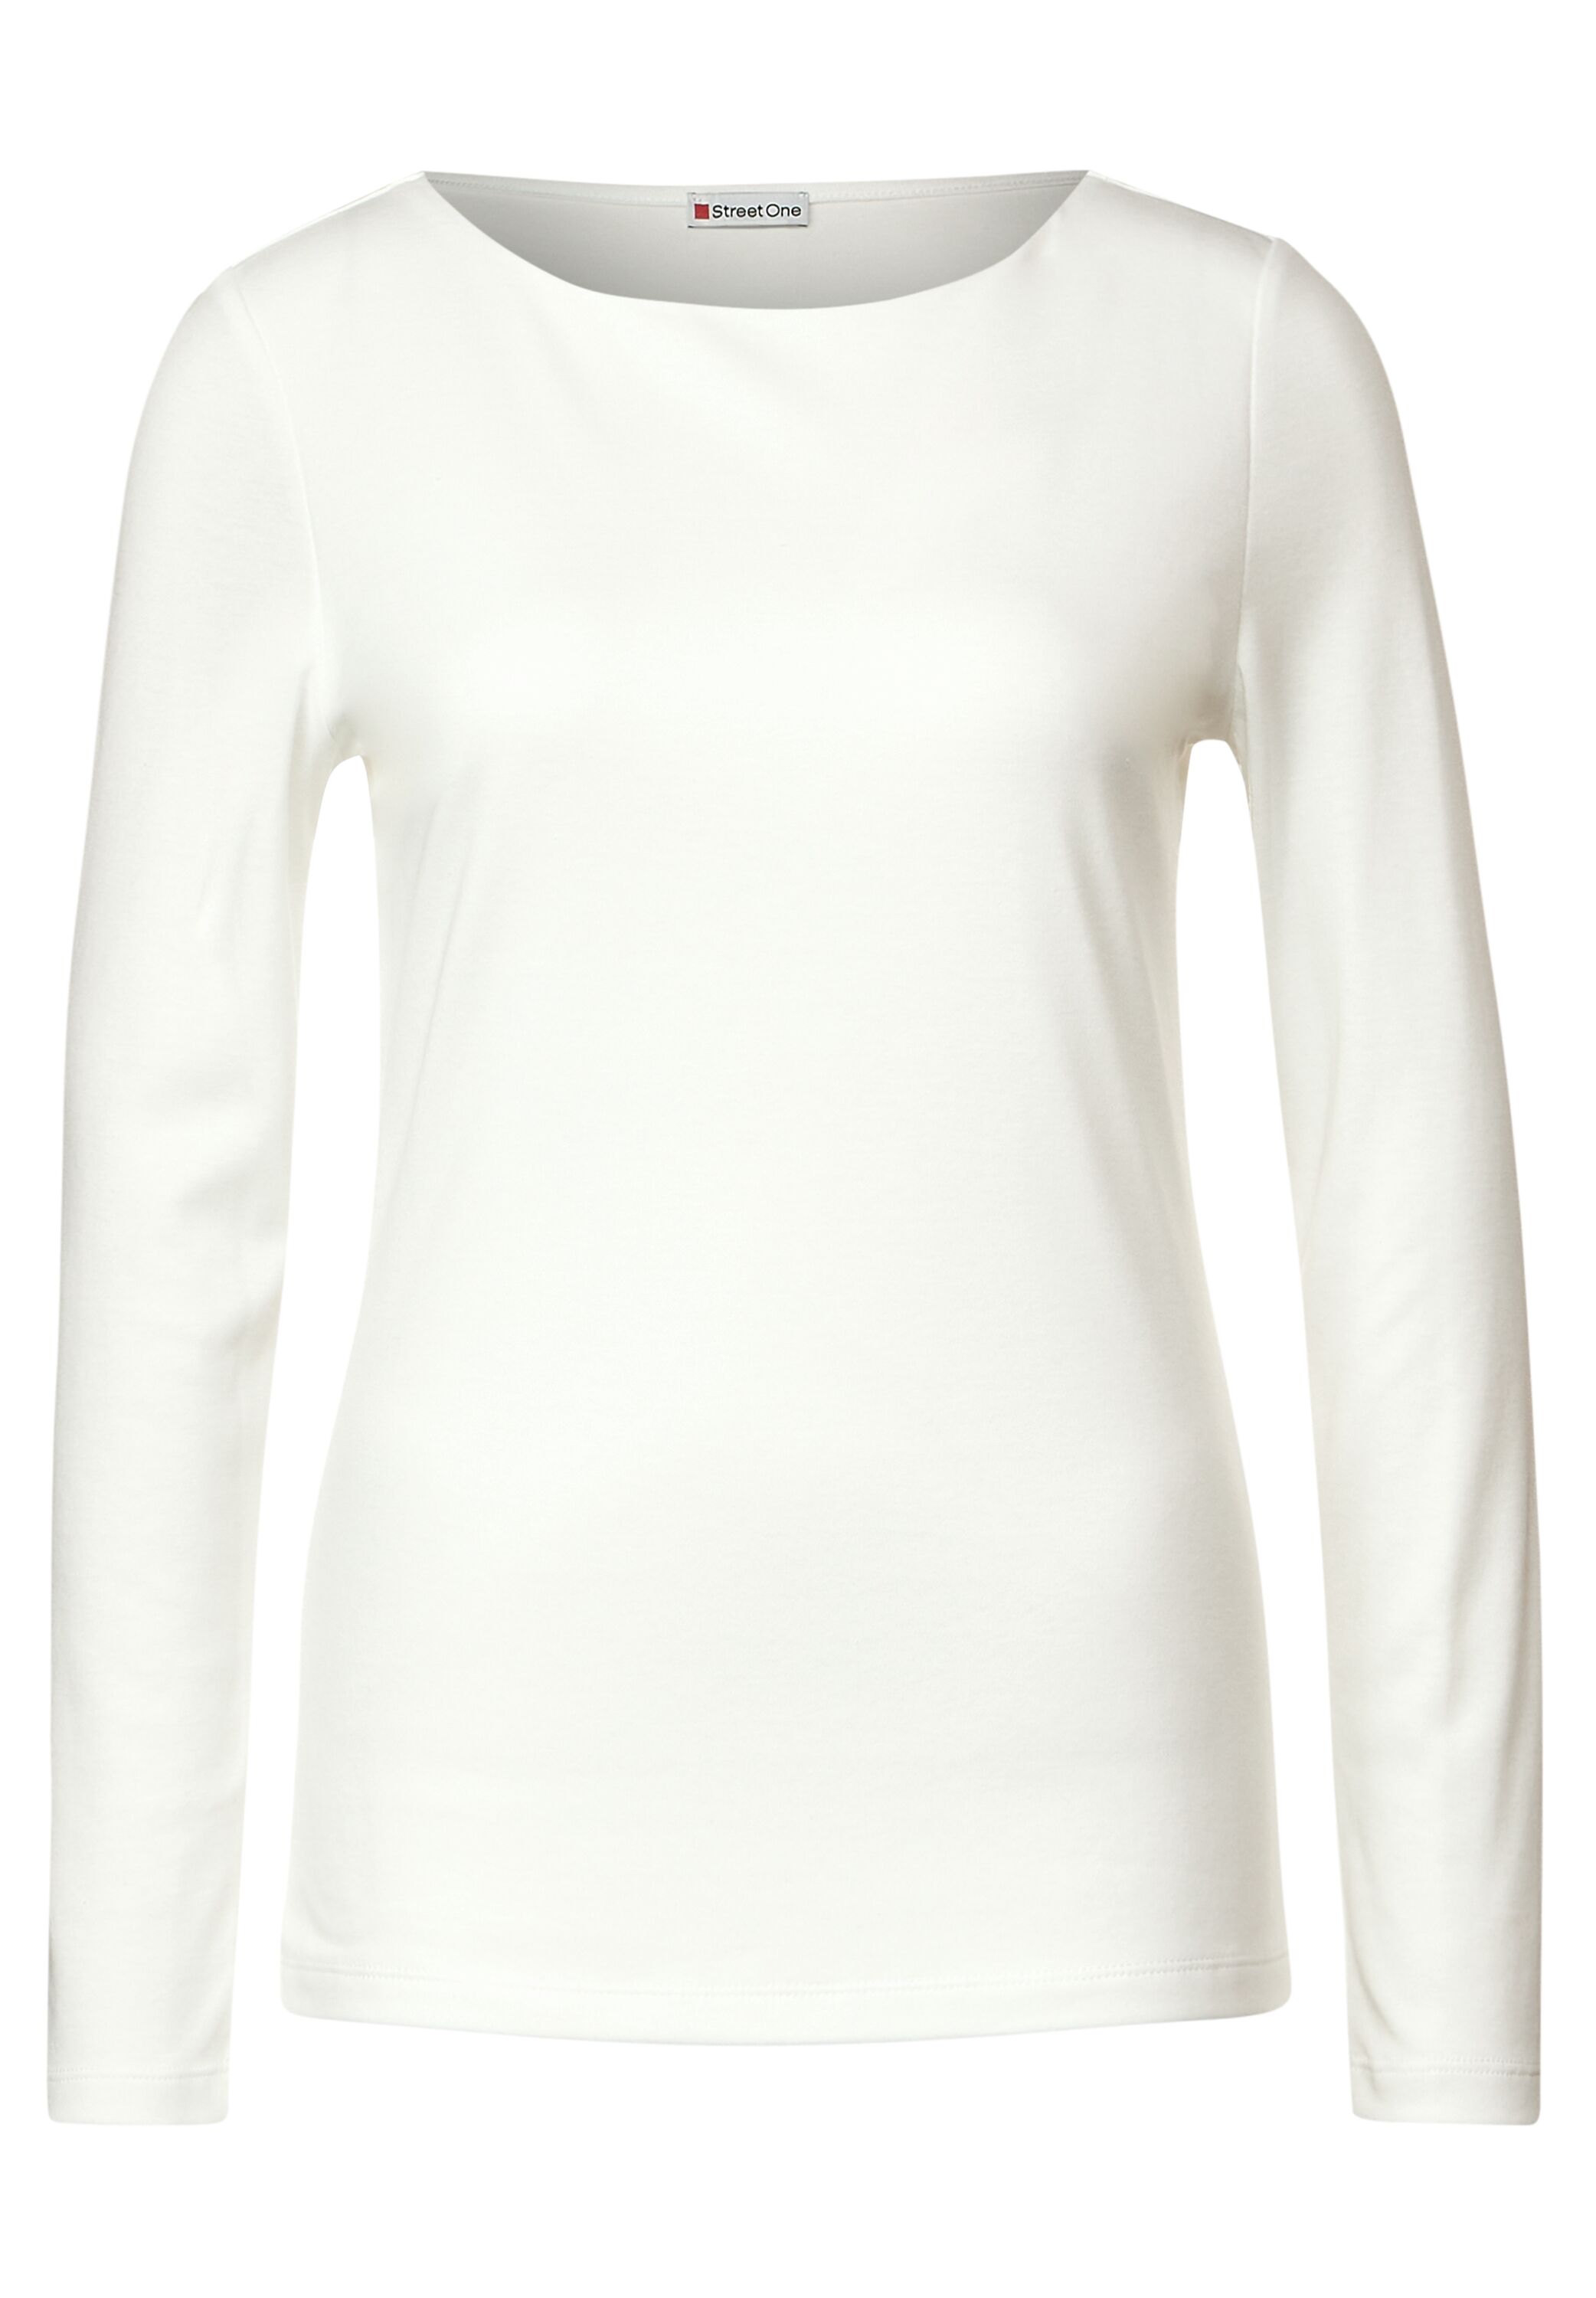 Street in Mode A320502-10108 Langarmshirt White Off One - CONCEPT Lanea